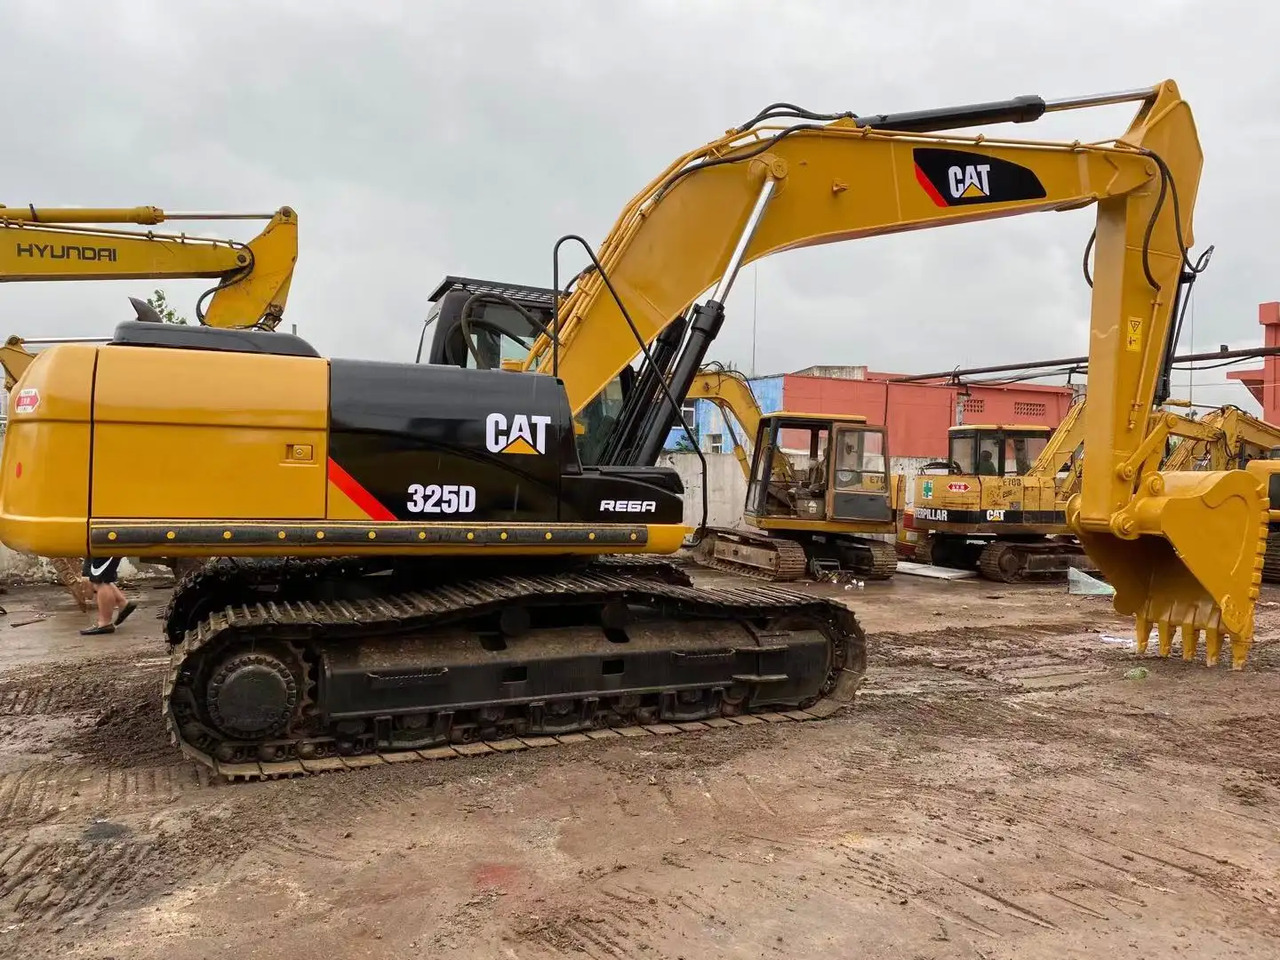 Crawler excavator good condition used caterpillar excavator 325D used cat excavator cheap price 325D 325DL for sale: picture 2